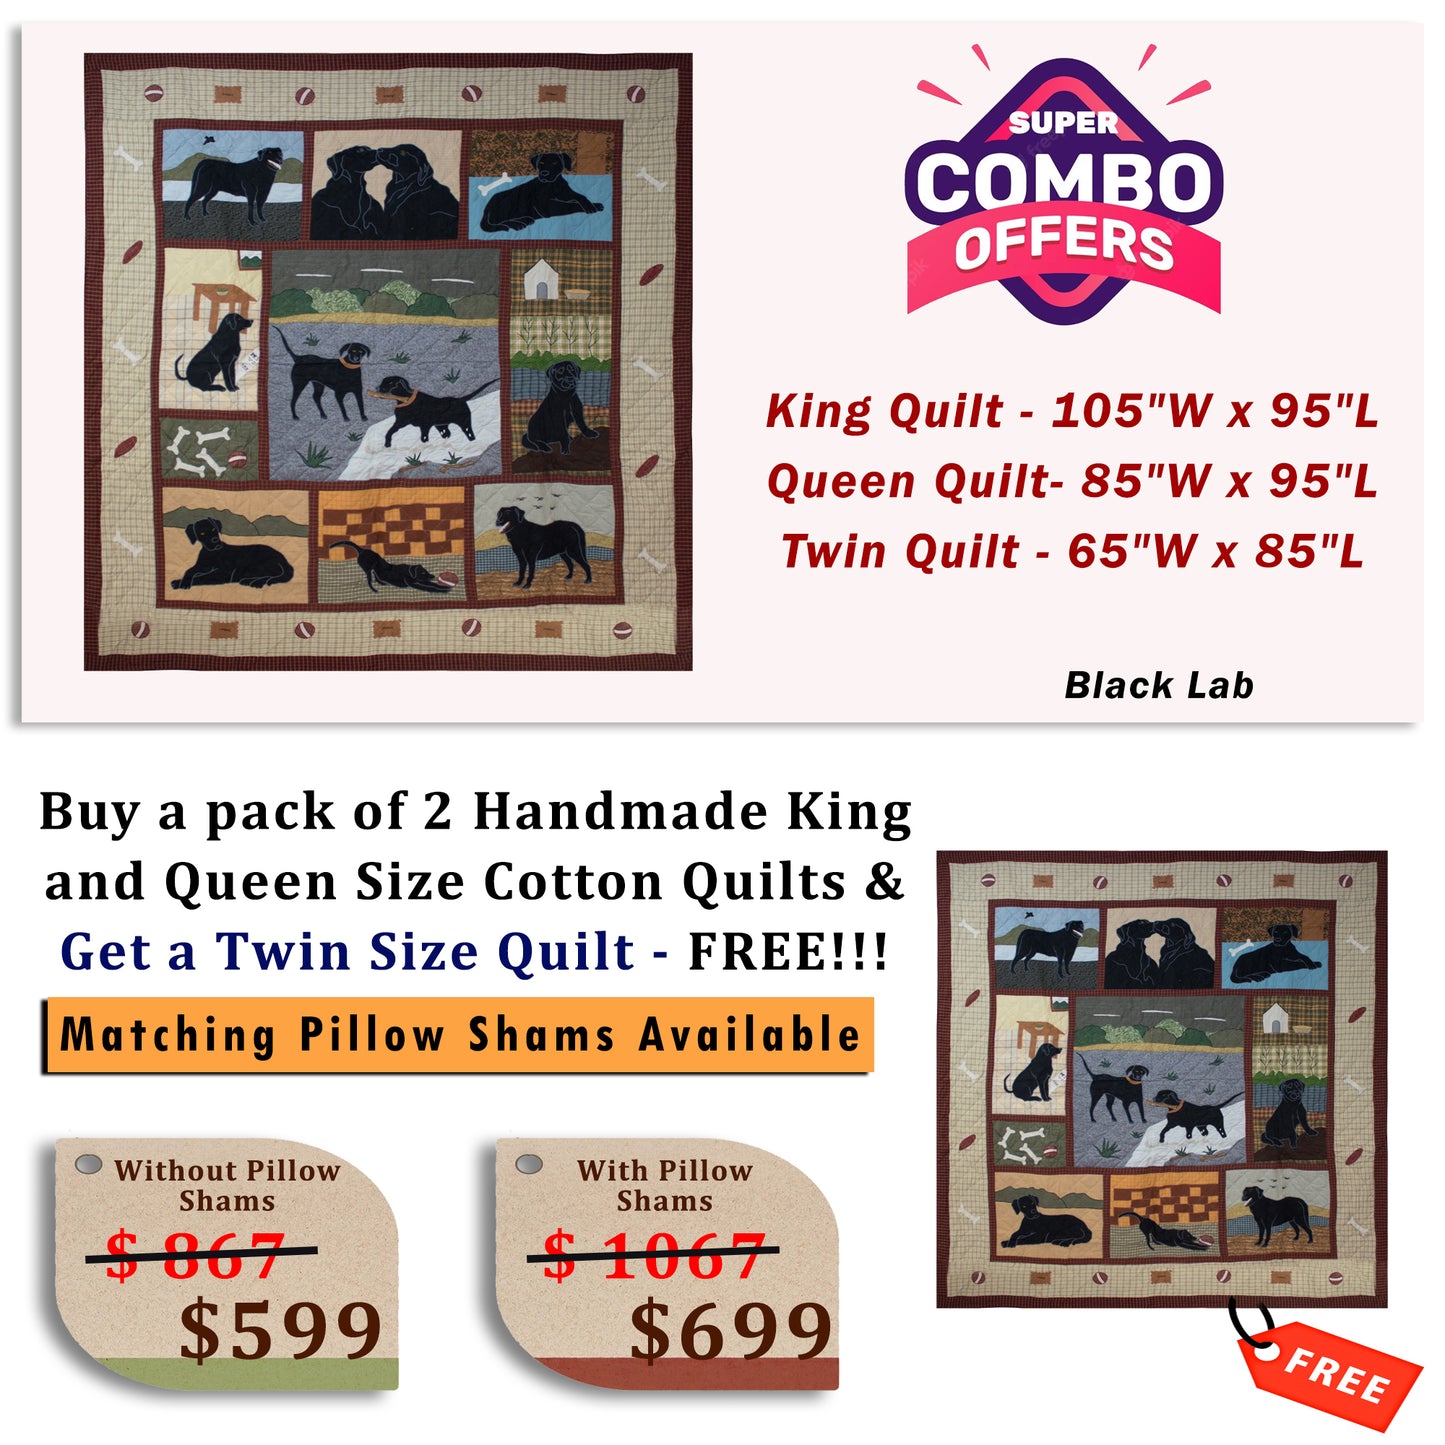 Black Lab - Buy a pack of King and Queen Size Quilt, and get a Twin Size Quilt FREE!!!